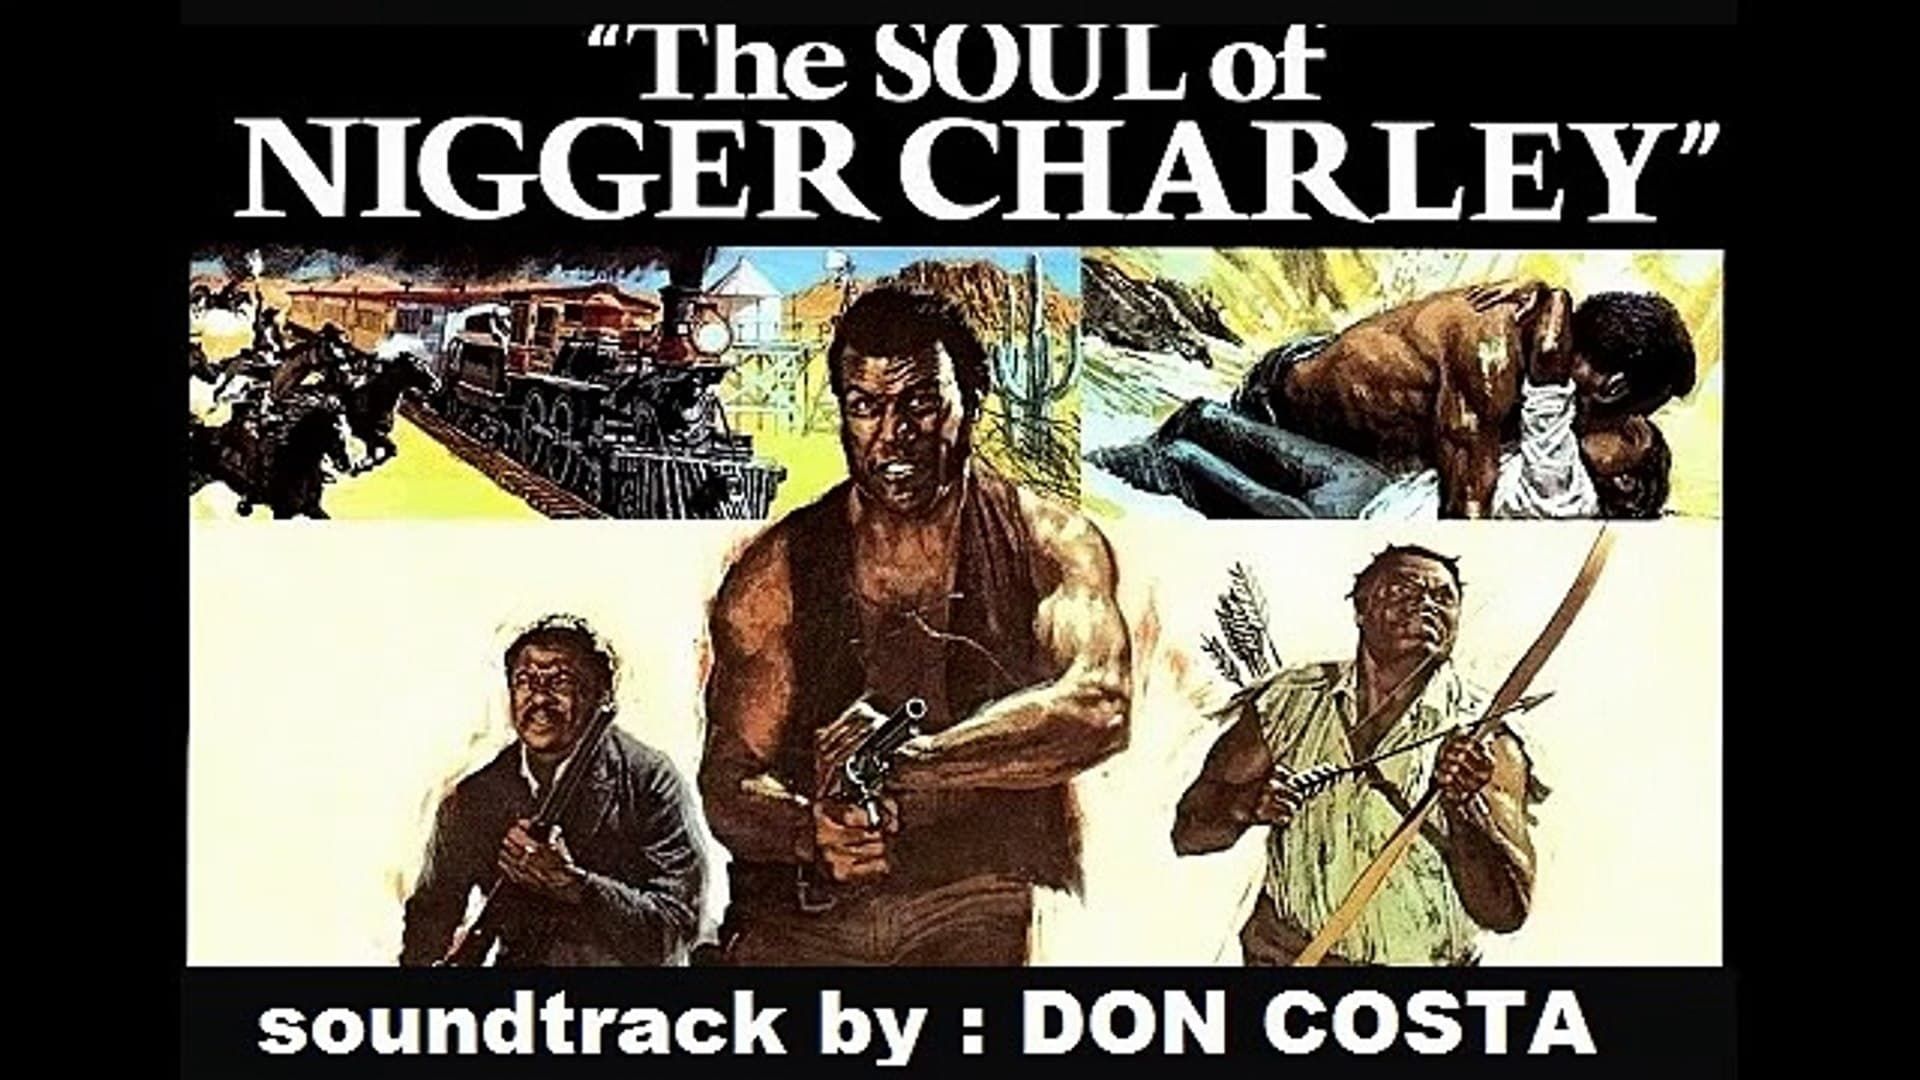 The Soul of Nigger Charley background